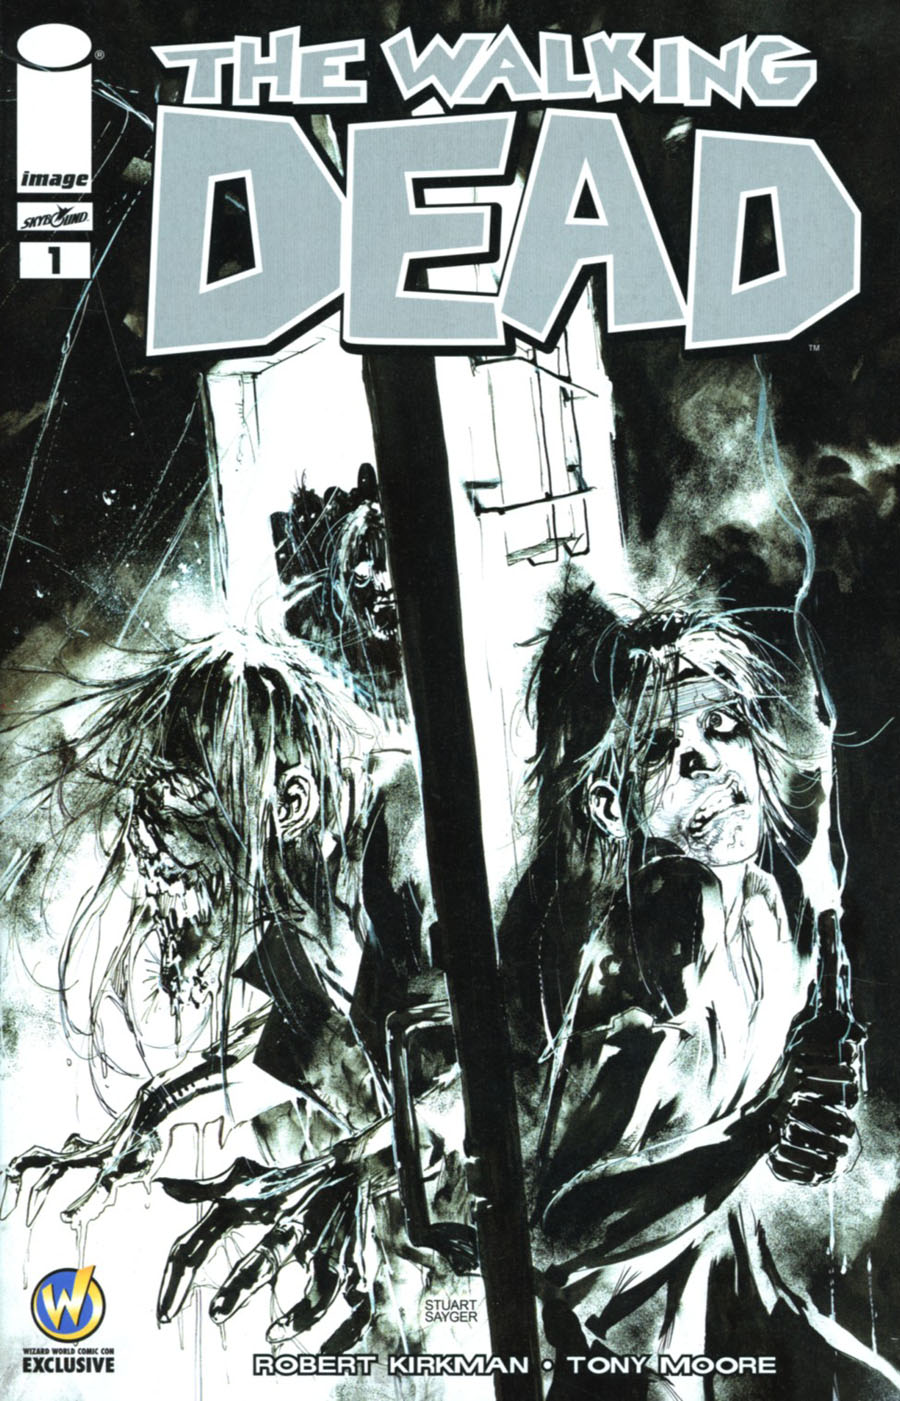 Walking Dead #1 Cover K Wizard World Comic Con Columbus VIP Exclusive Stuart Sayger Sketch Variant Cover